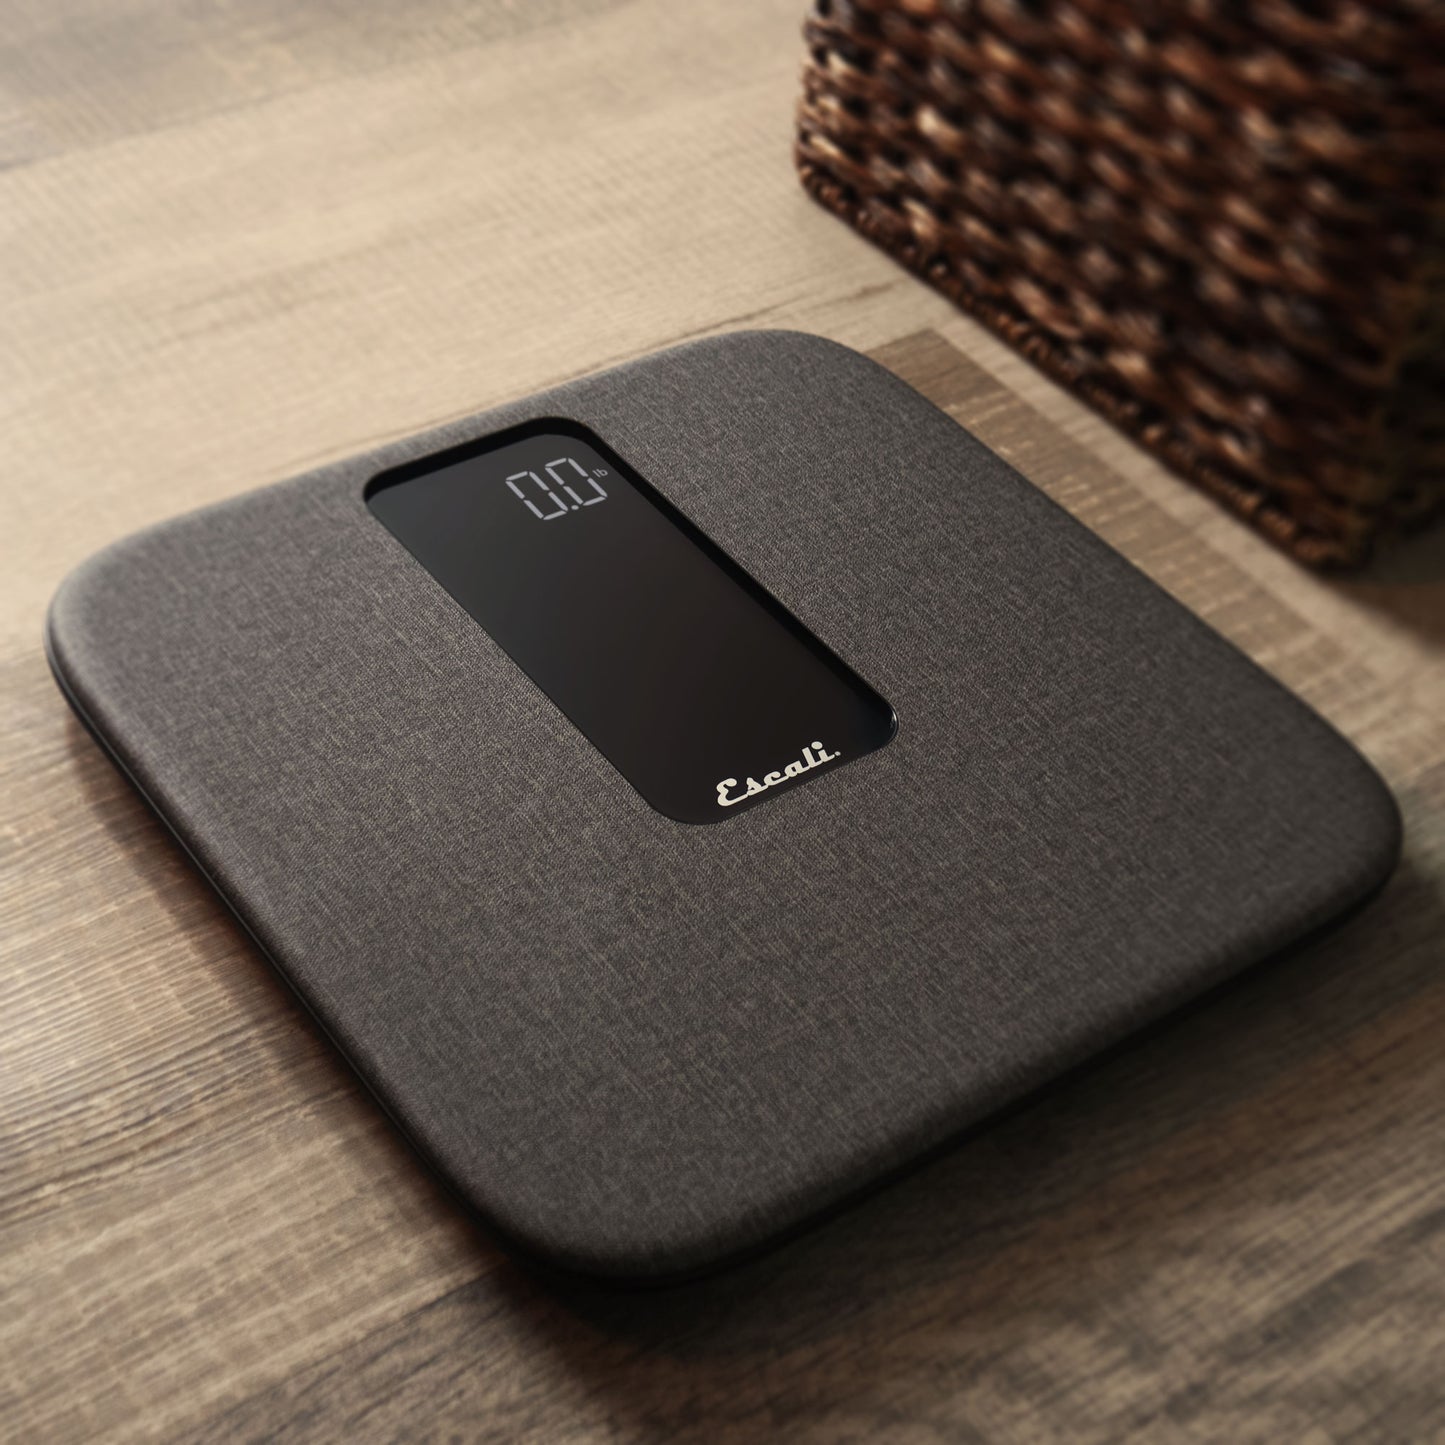 A lifestyle photo of the ComfortStep Bathroom Scale, sitting on a wood floor next to a basket.